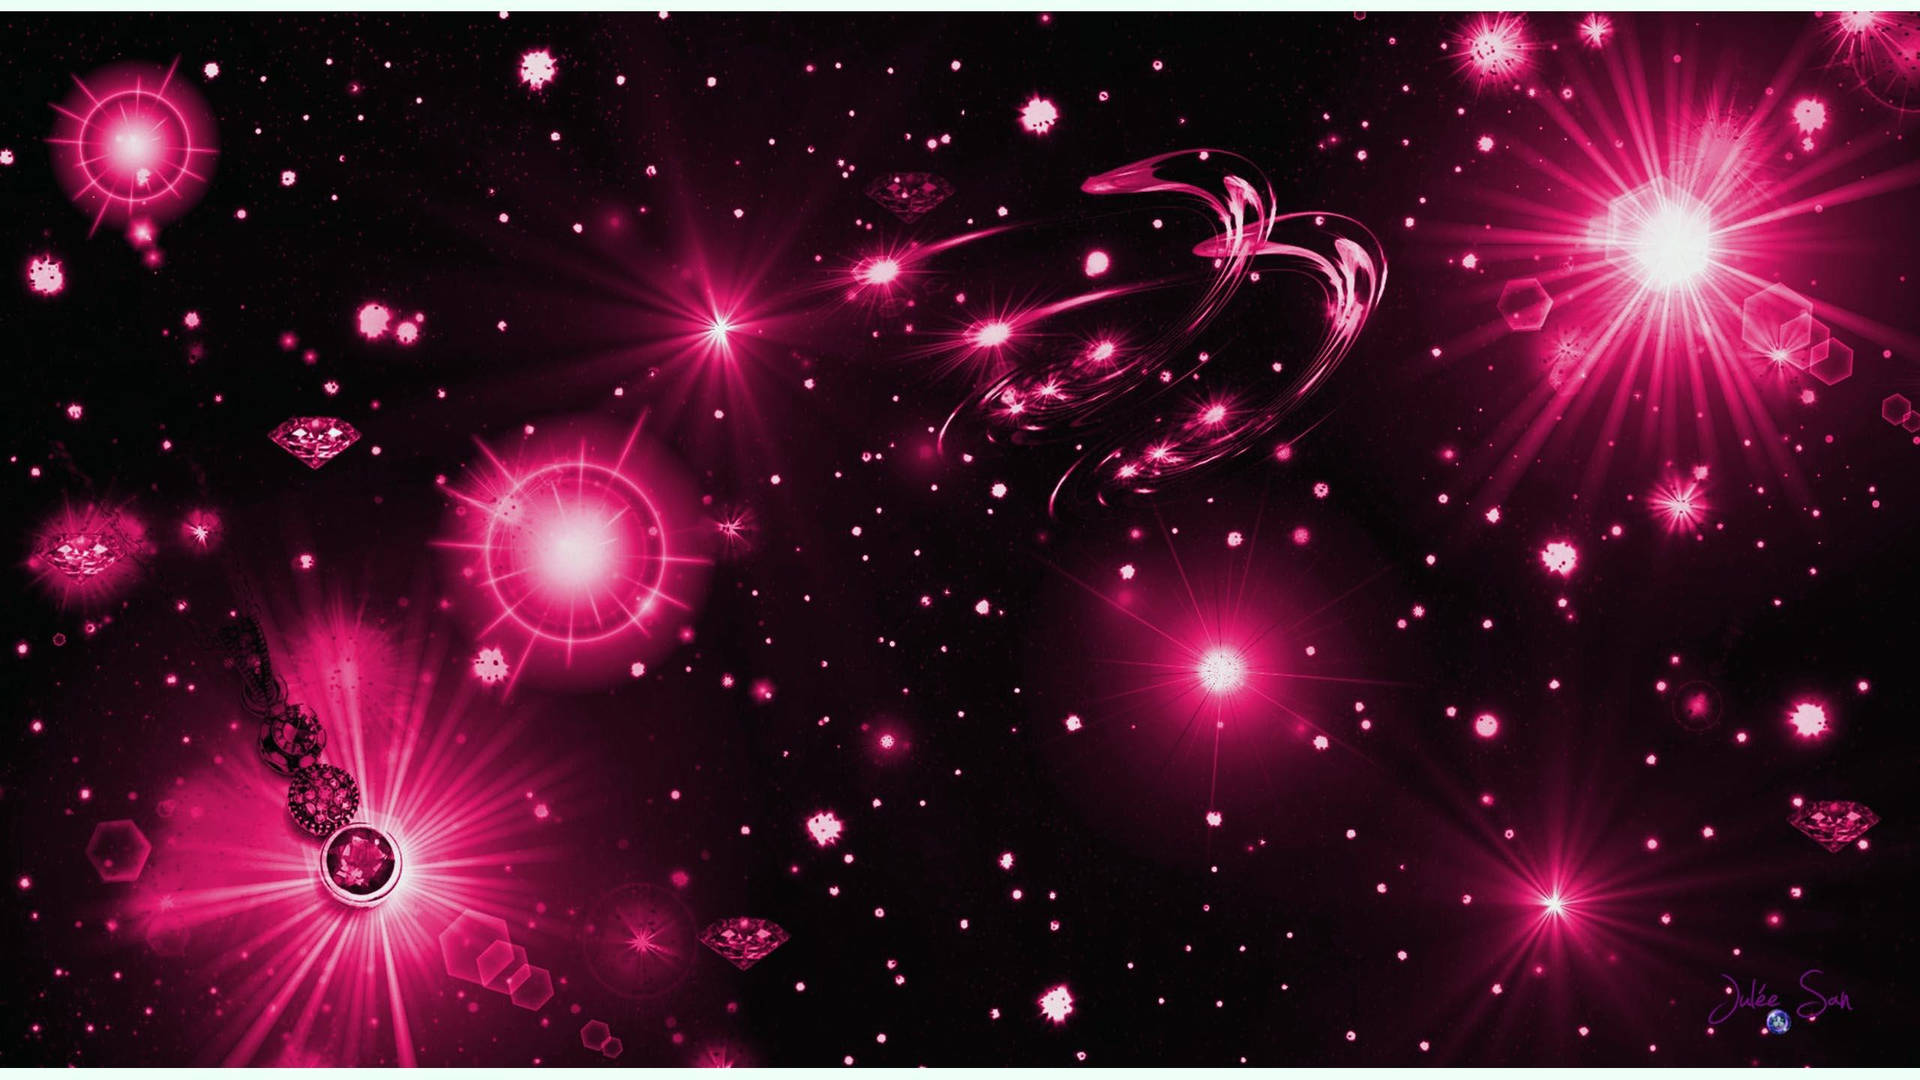 Hot Pink Celestial Bodies